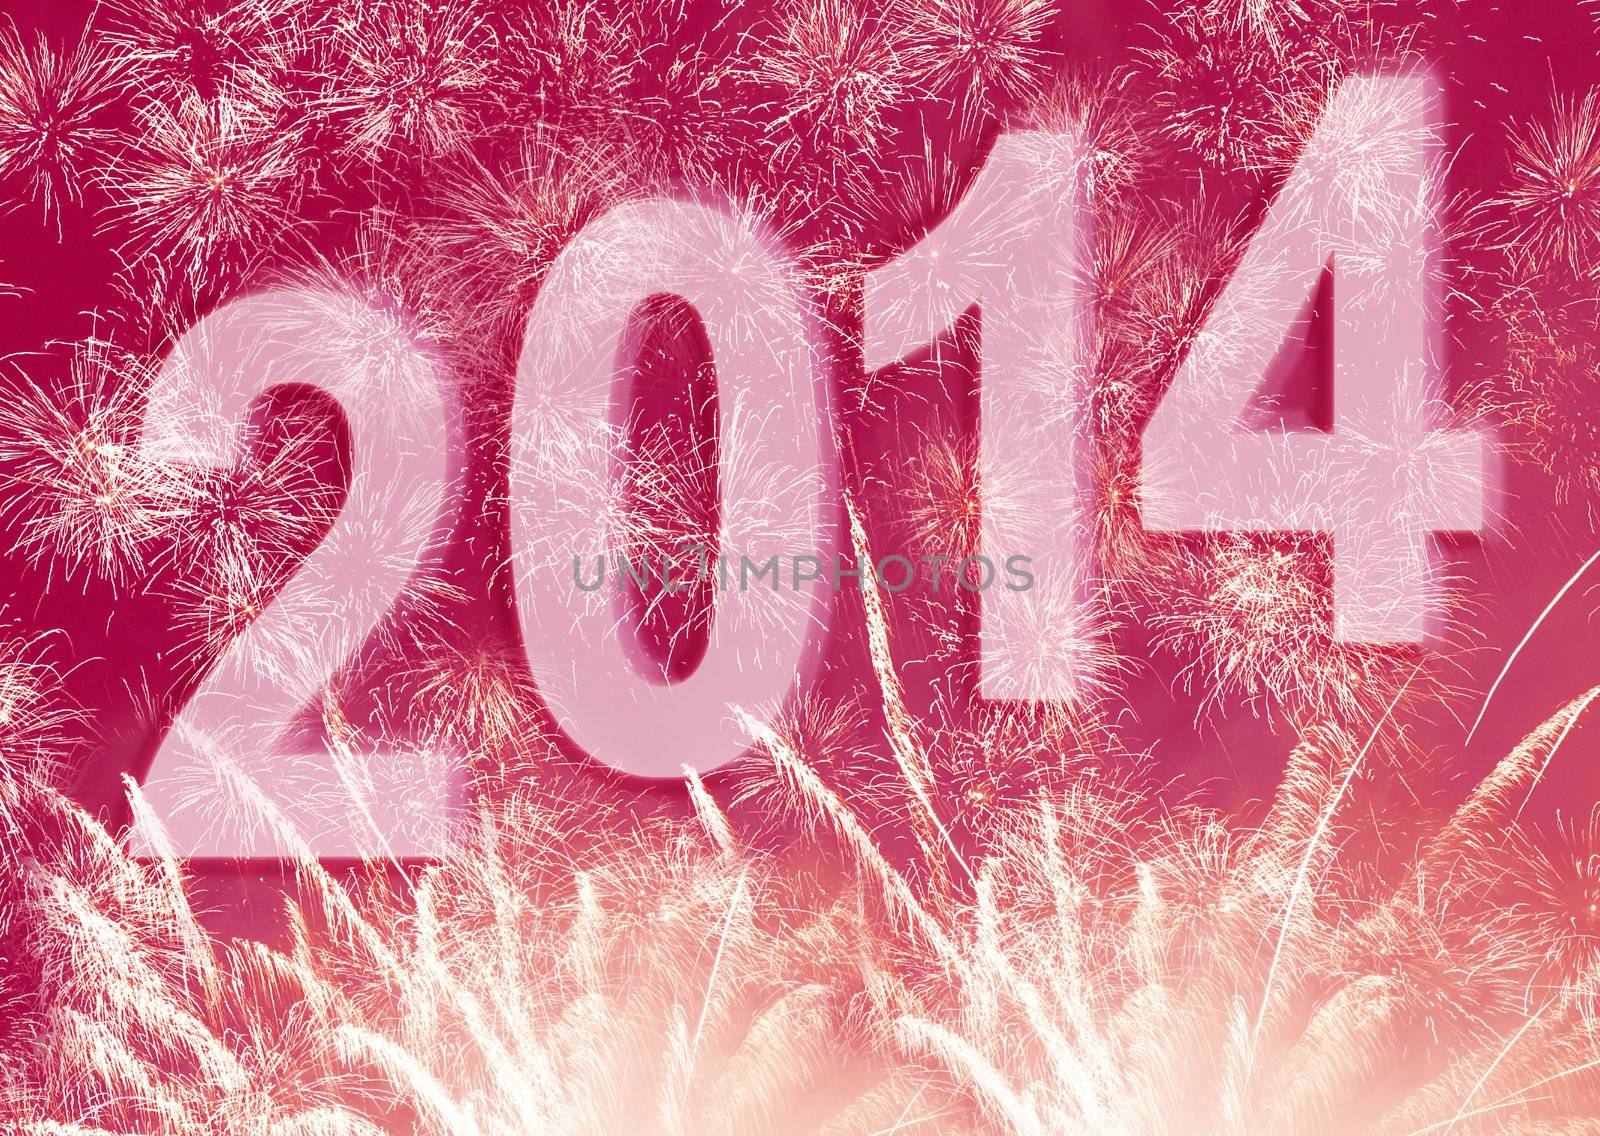 New Year 2014 background with fireworks